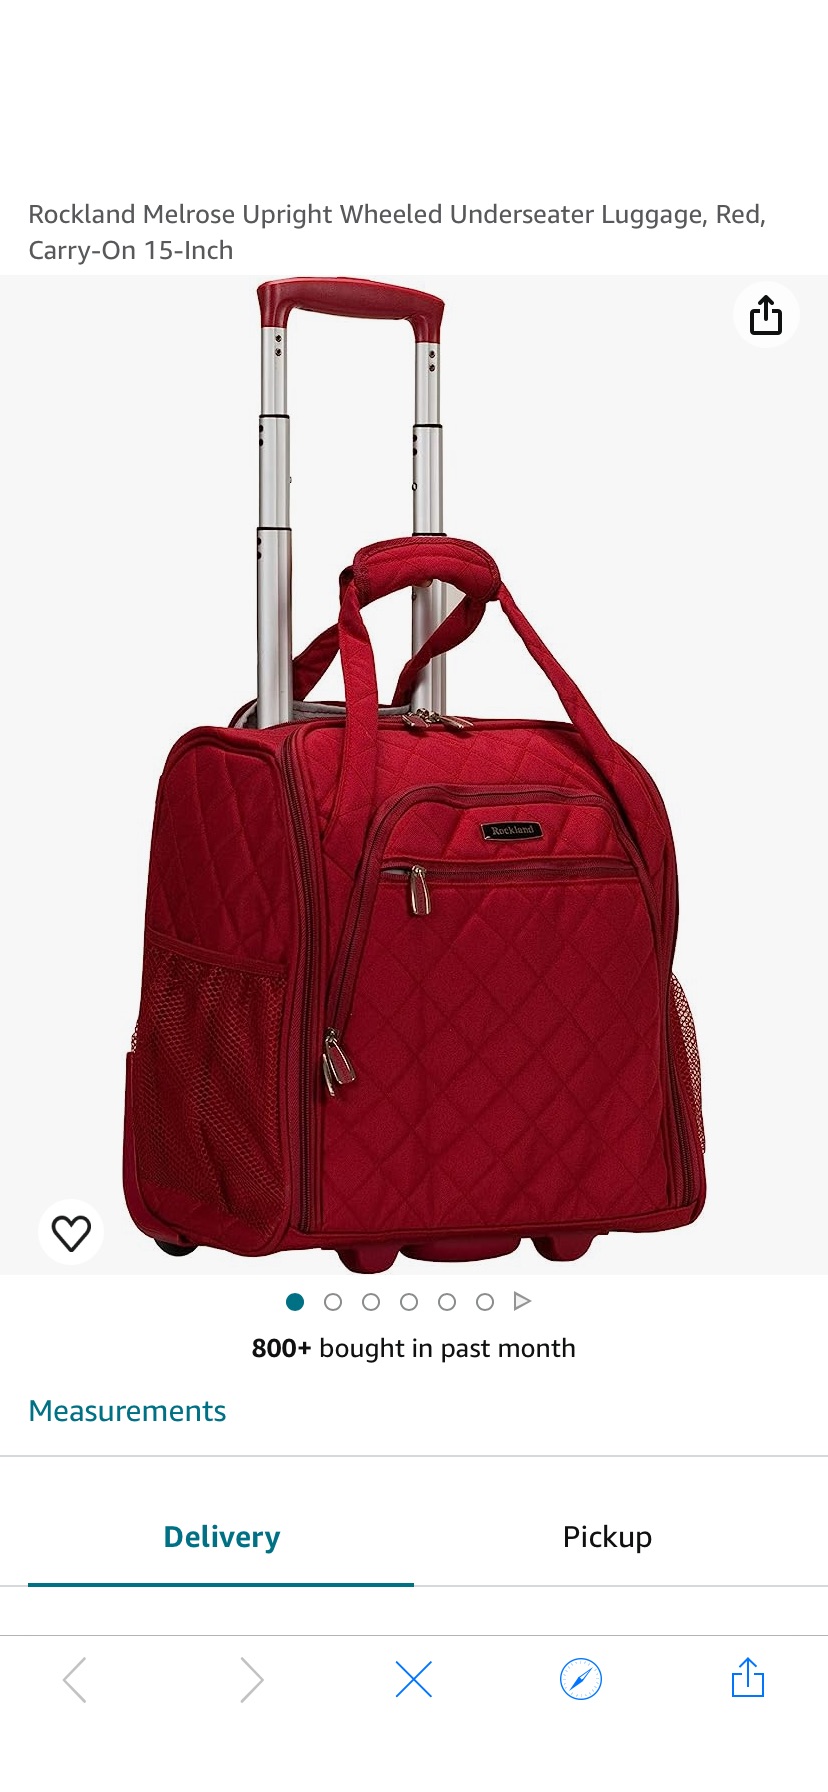 Amazon.com | Rockland Melrose Upright Wheeled Underseater Luggage, Red, Carry-On 15-Inch | Carry-Ons